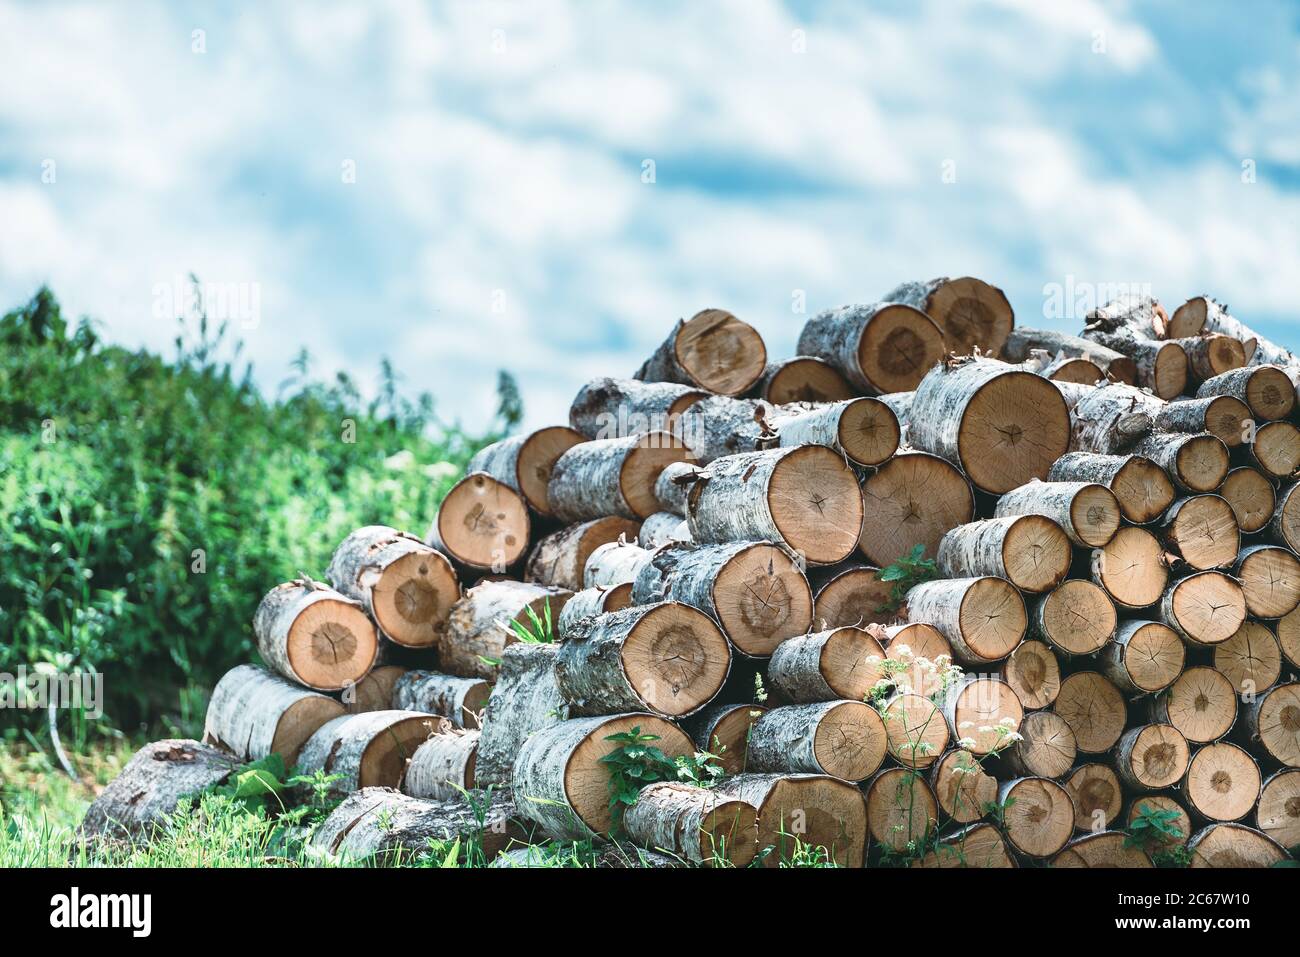 Firewood, birch logs on the background of the sky. Rural landscape. Stock Photo